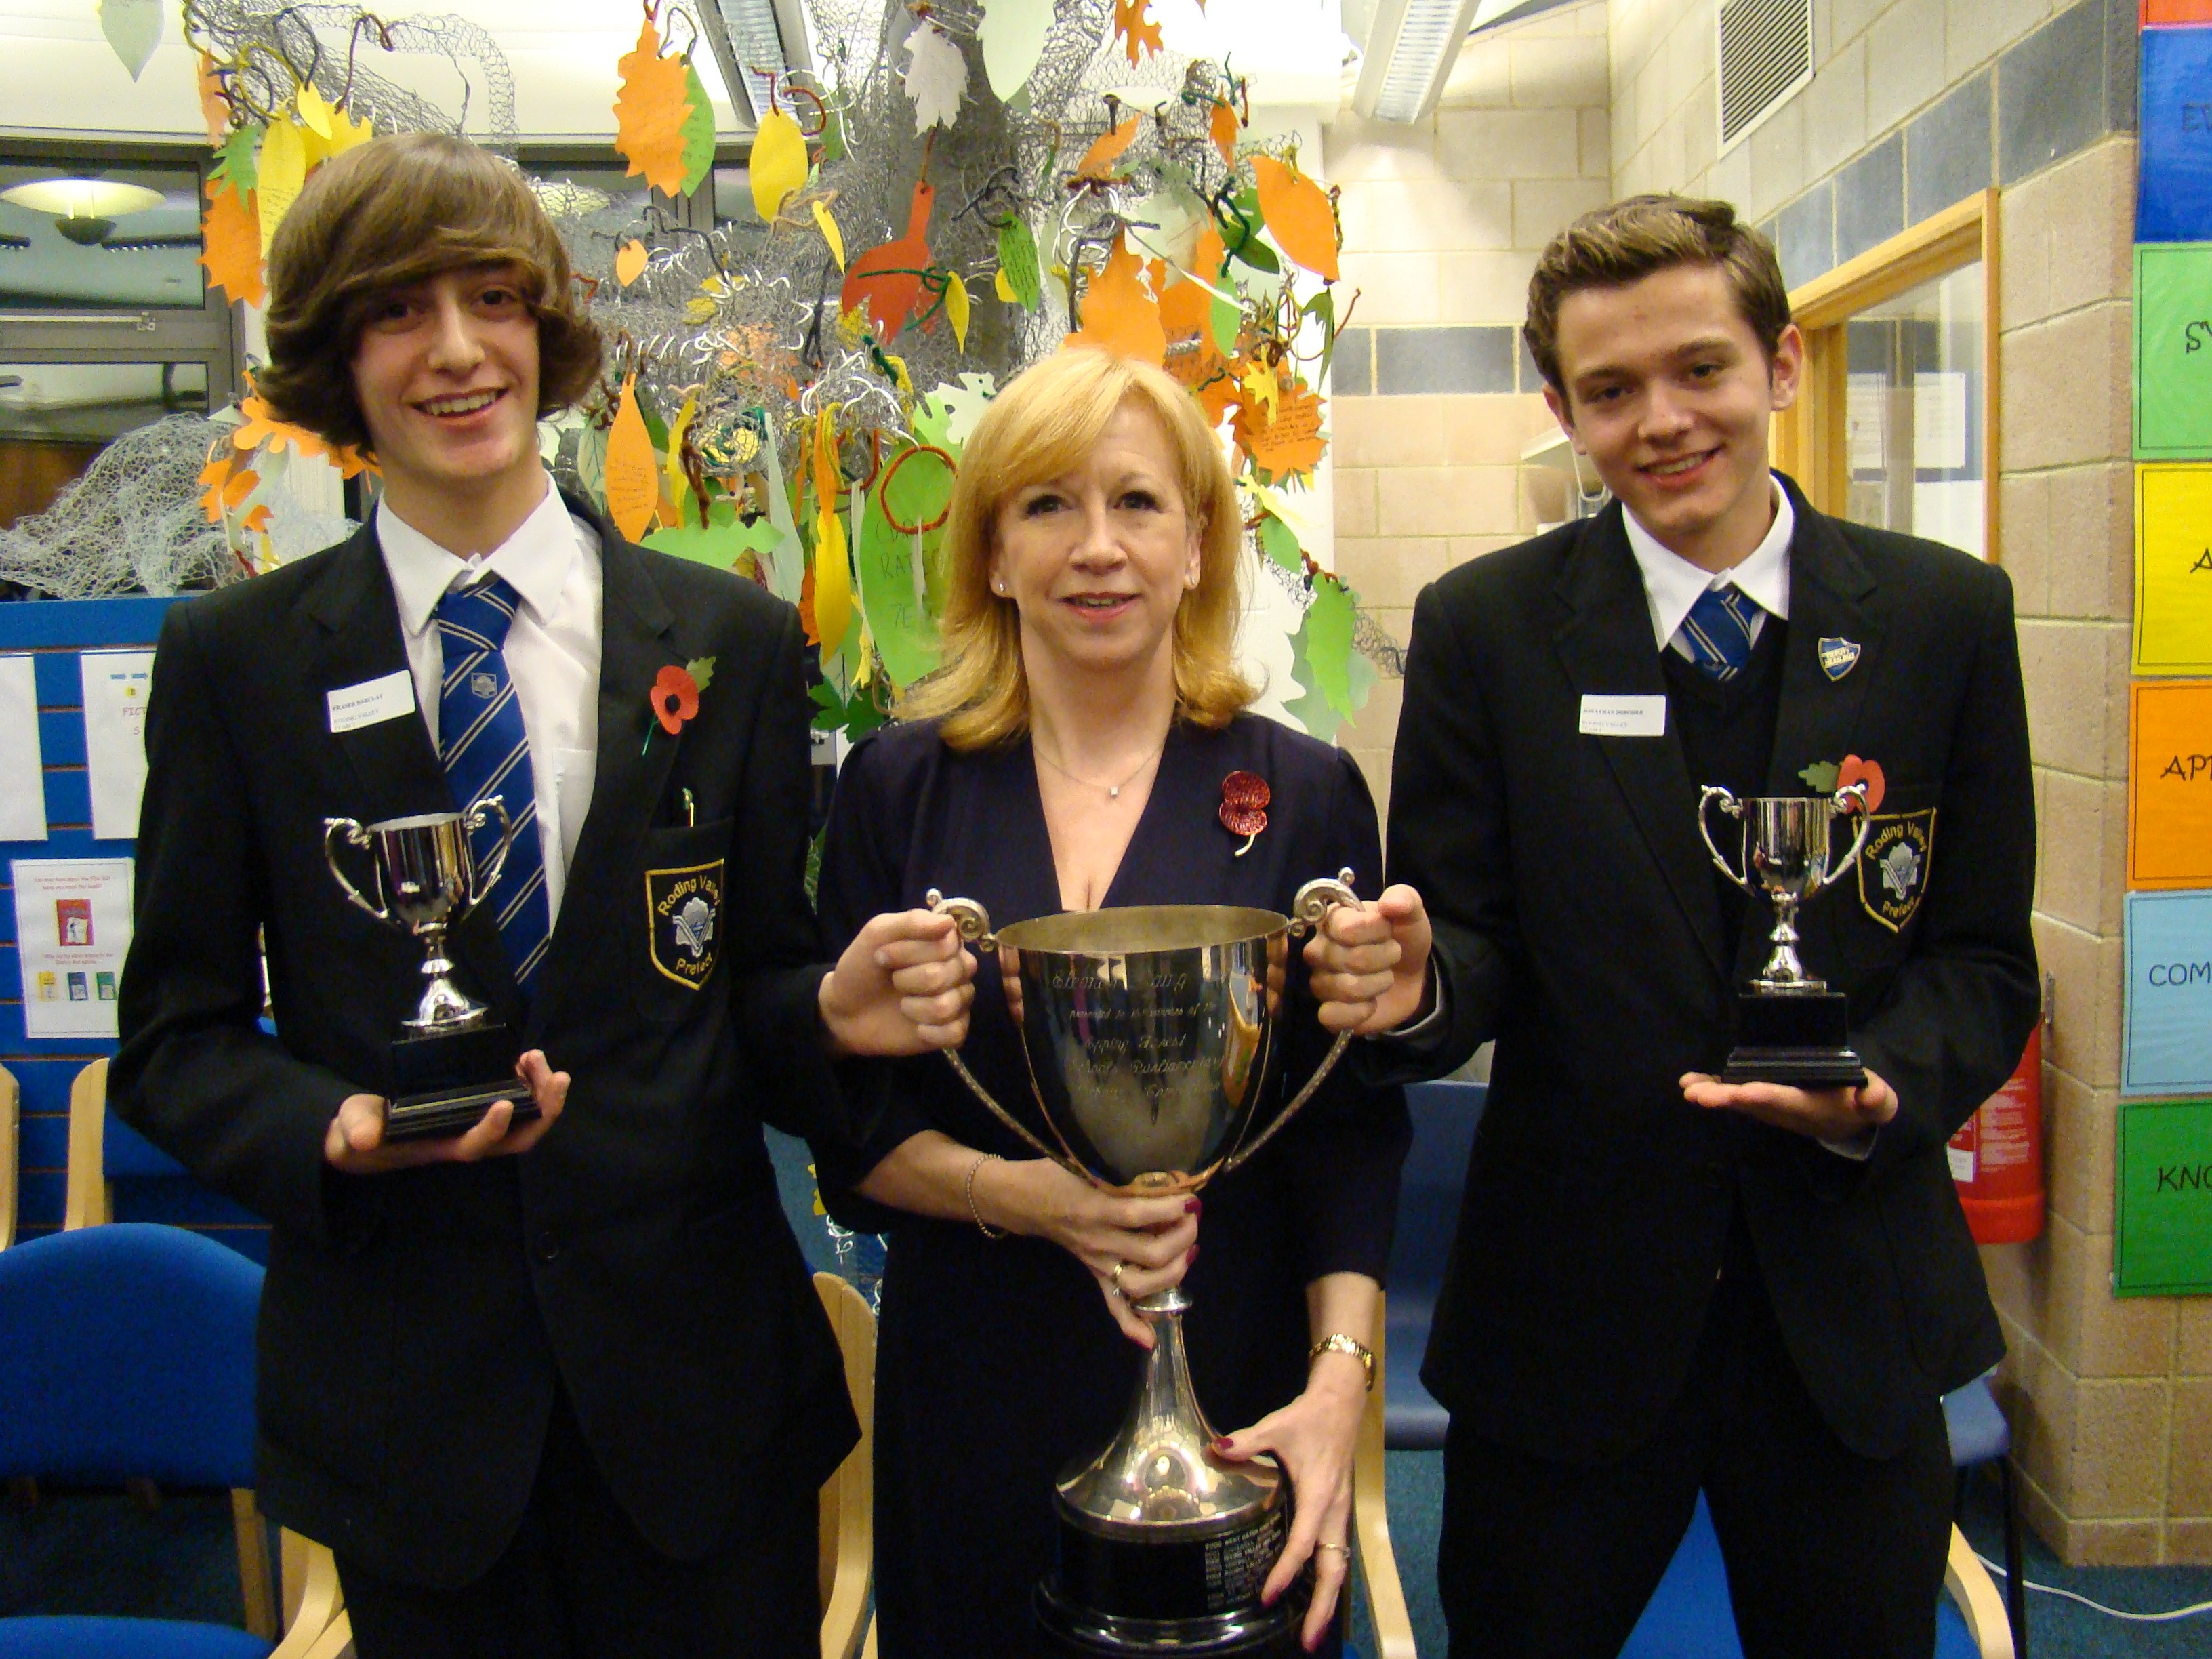 Roding Valley High School Wins Debating Competition | Epping Forest Conservatives3264 x 2448